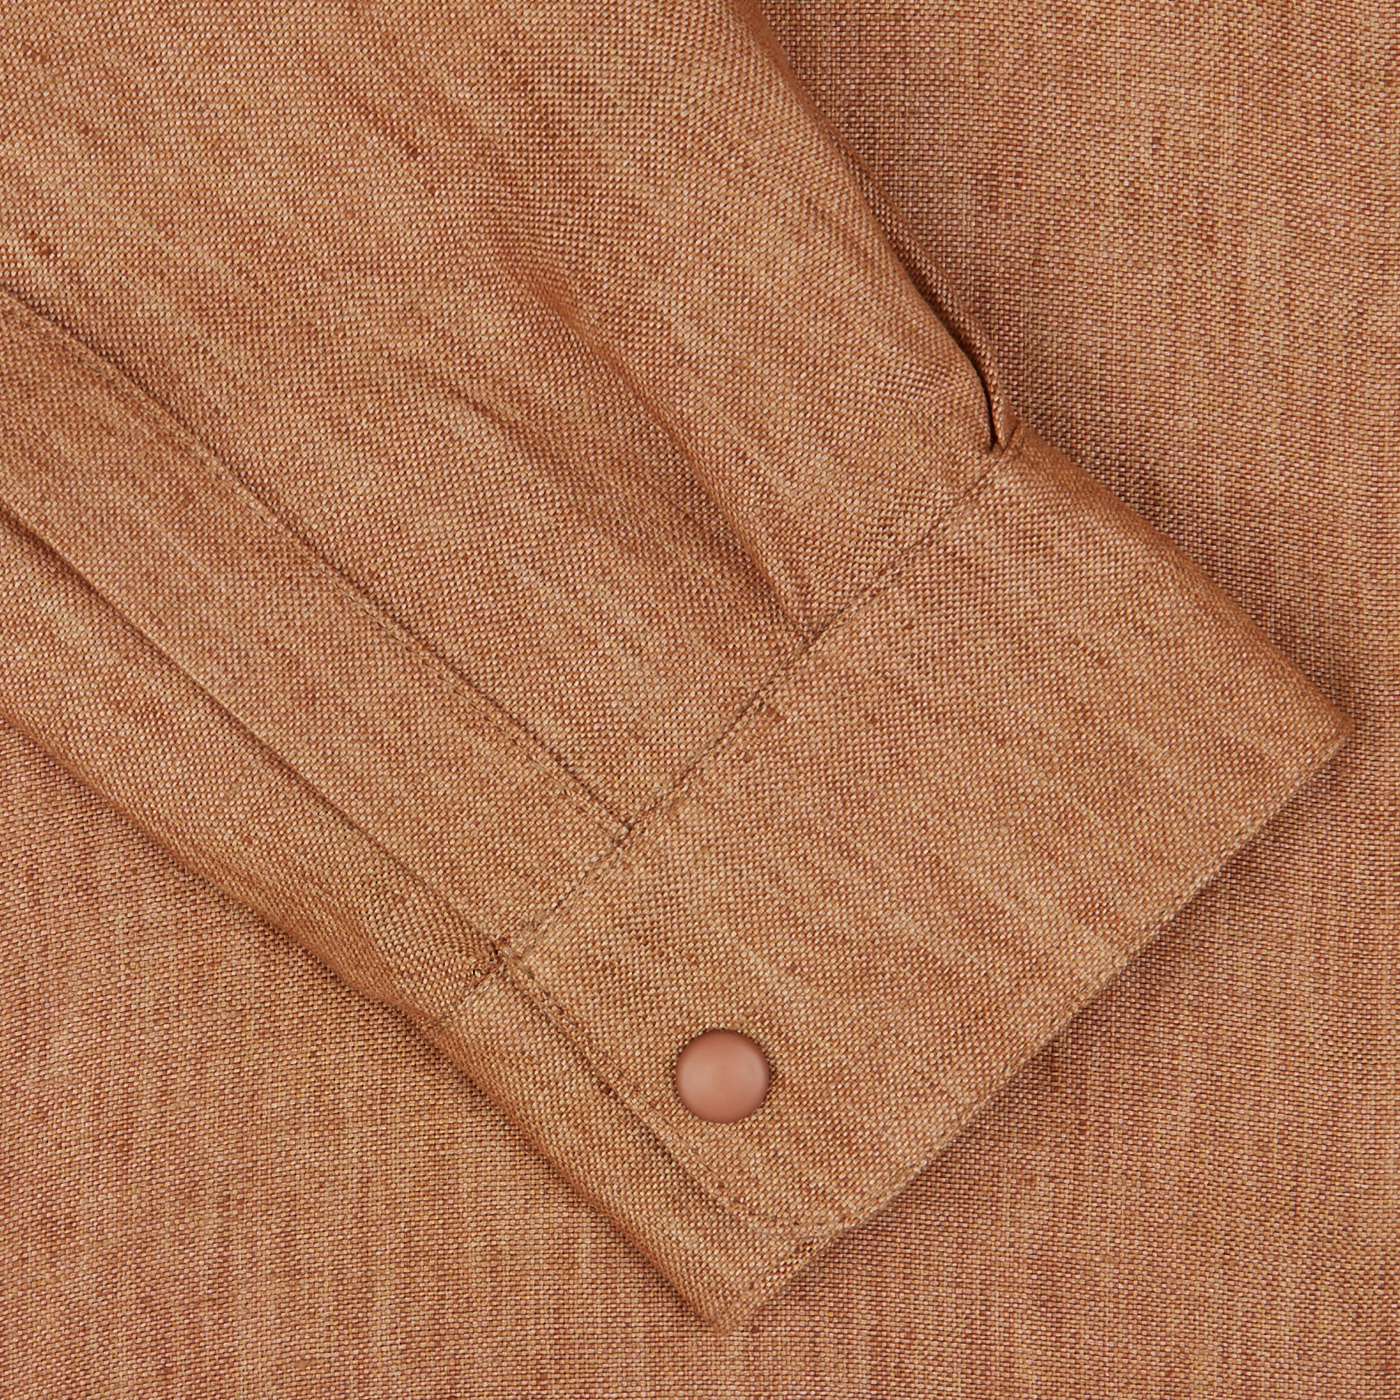 Close-up of a Terracotta Brown Organic Linen Overshirt by Mazzarelli with a buttoned cuff.